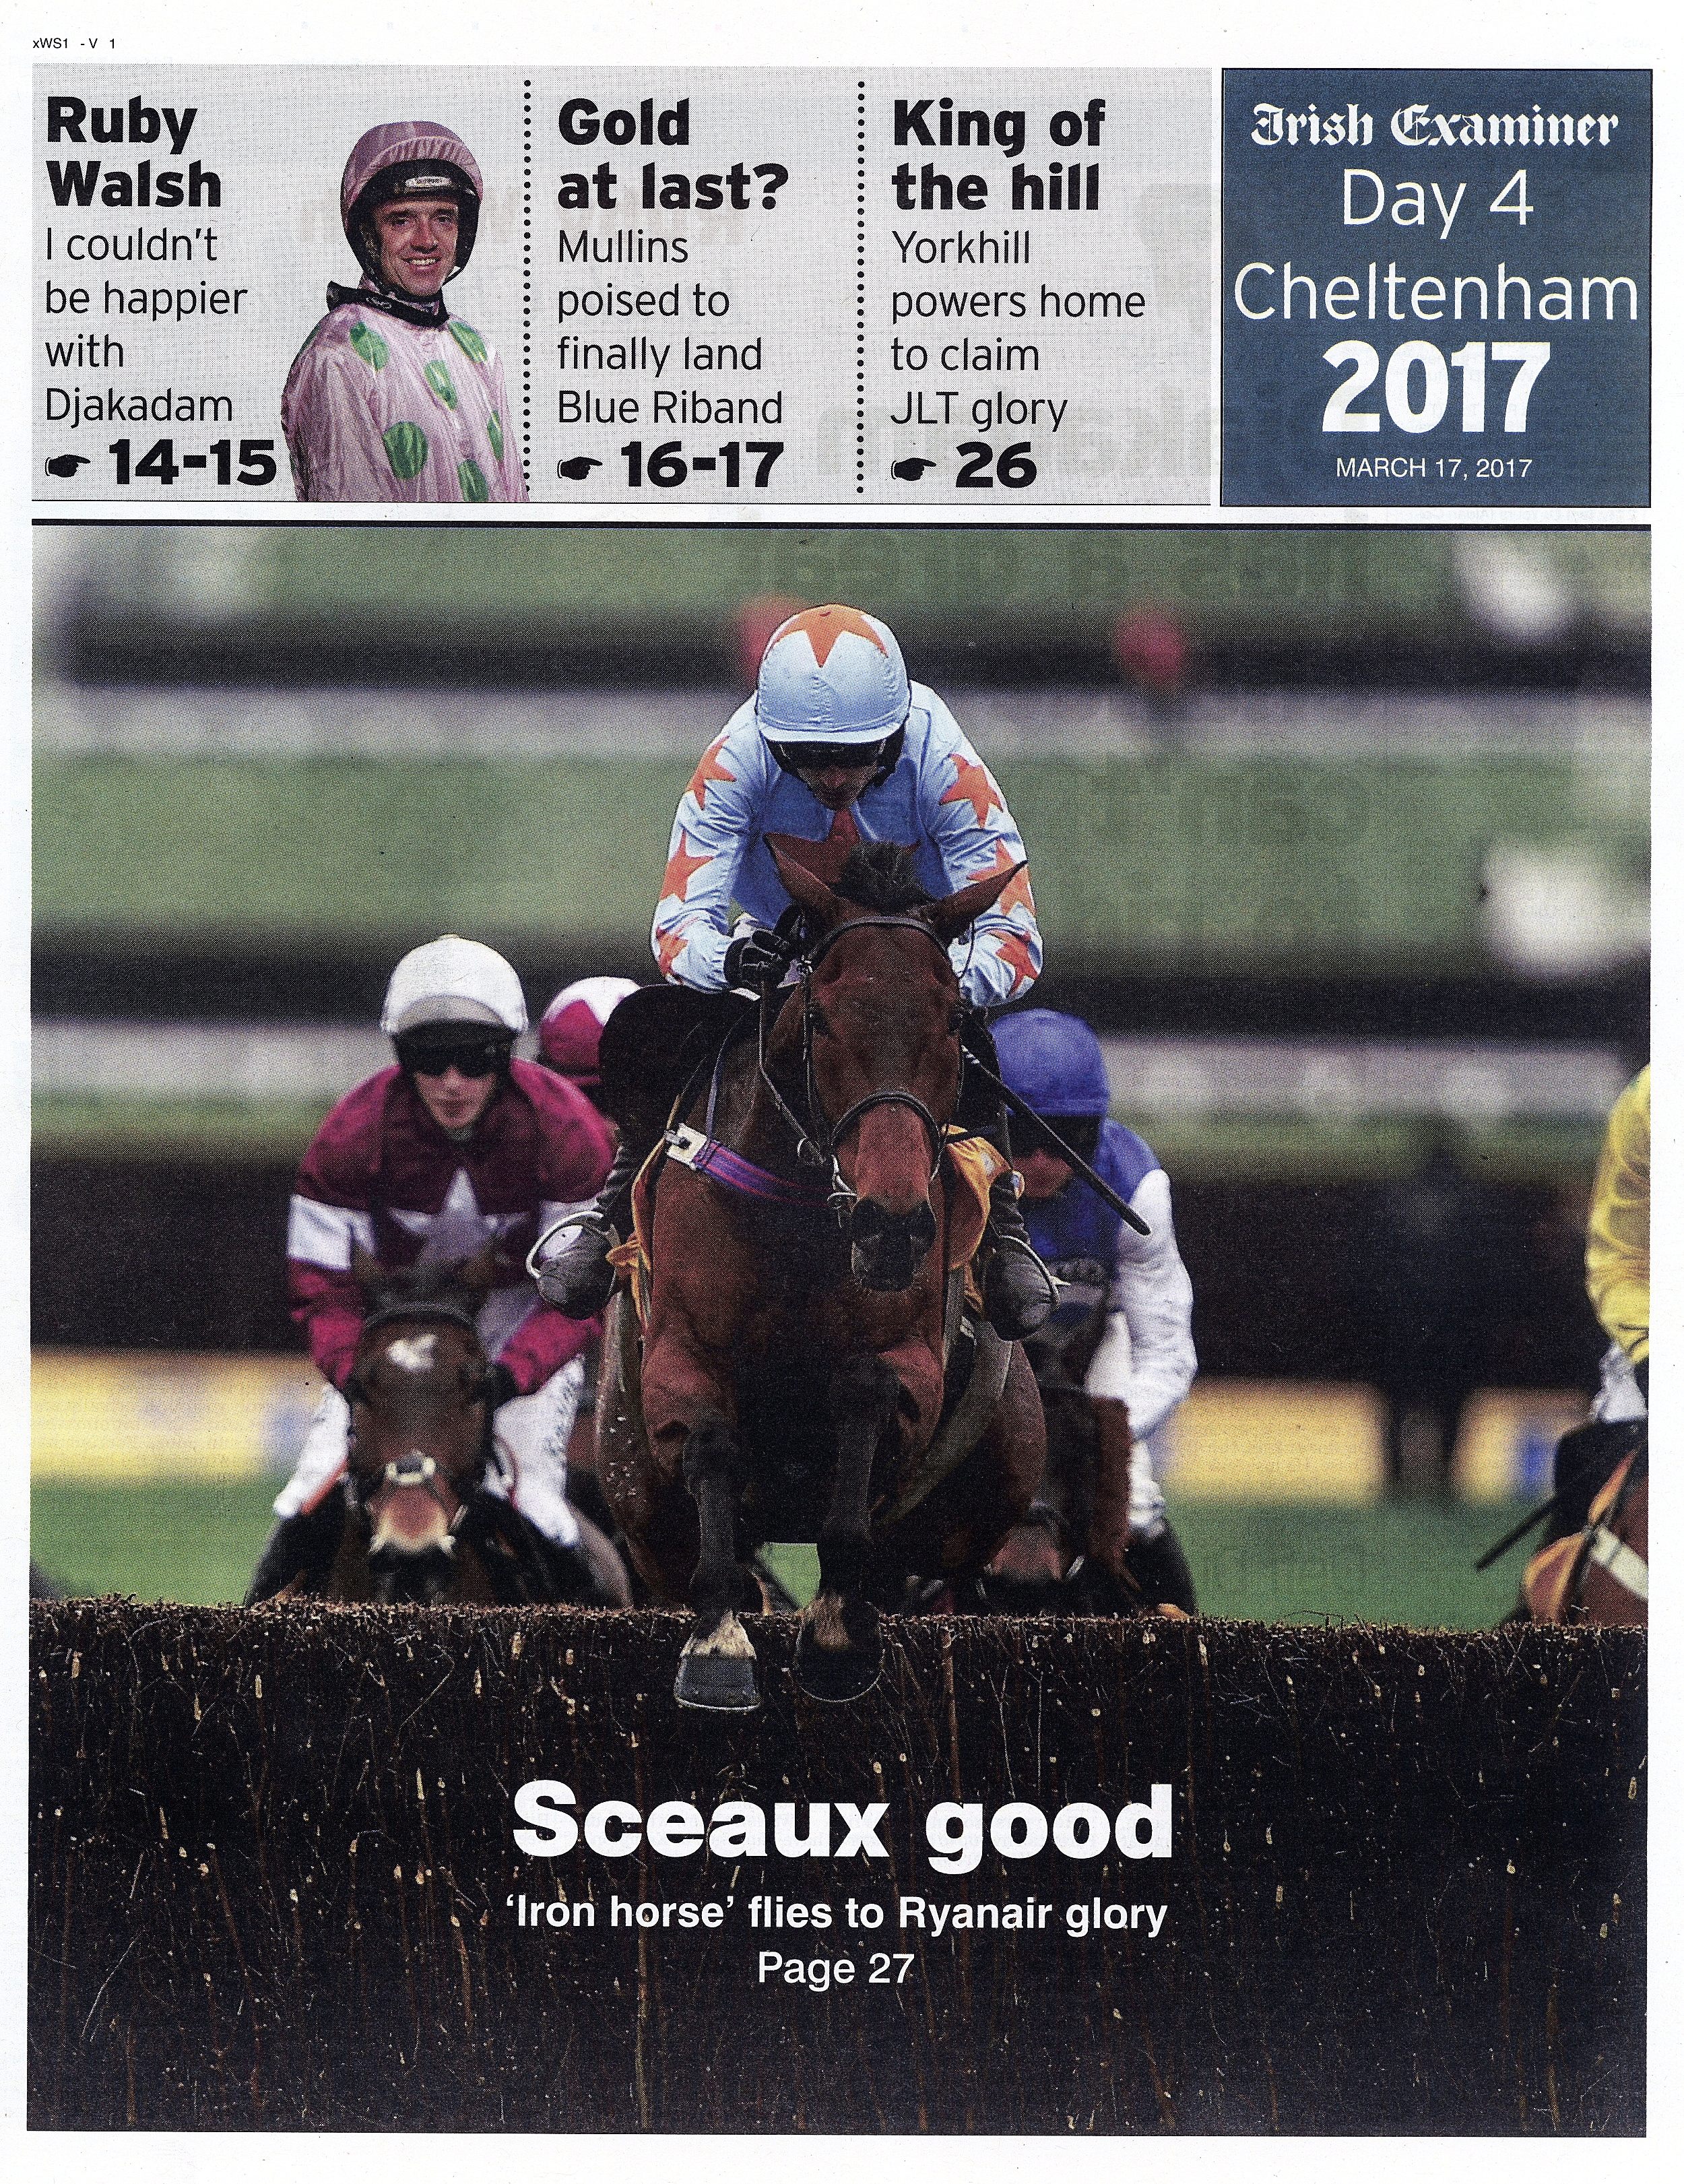  Un De Sceaux with Ruby Walsh up on their way to winning at Cheltenham Festival March 17 2017  Irish Examiner  